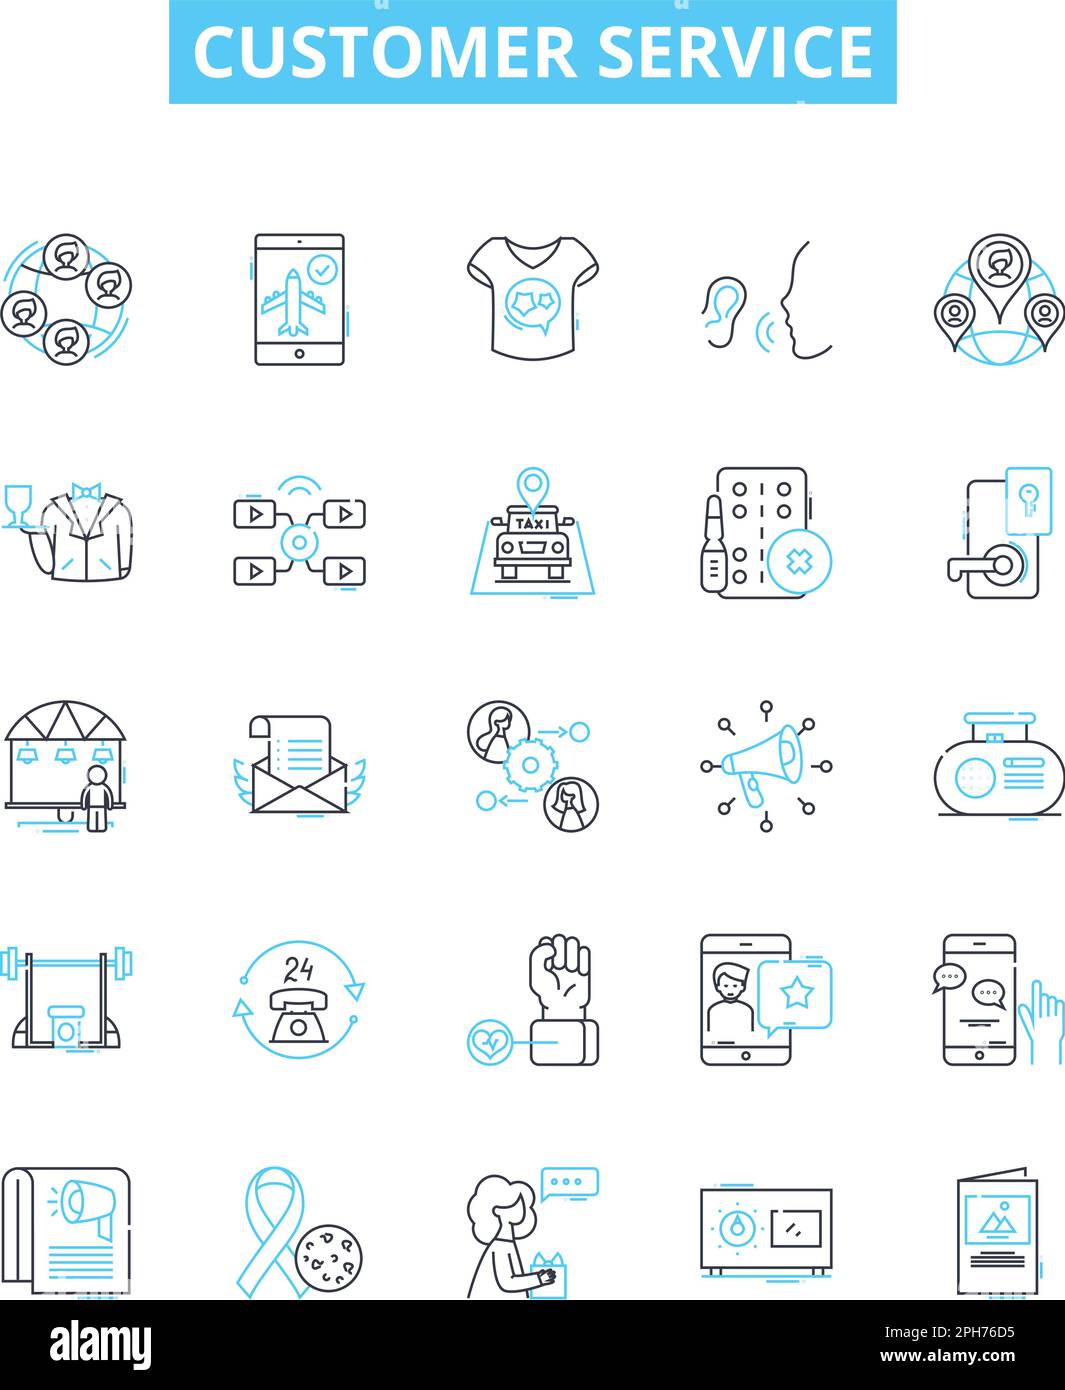 Customer service vector line icons set. Support, Assistance, Help, Care, Response, Feedback, Attendance illustration outline concept symbols and signs Stock Vector